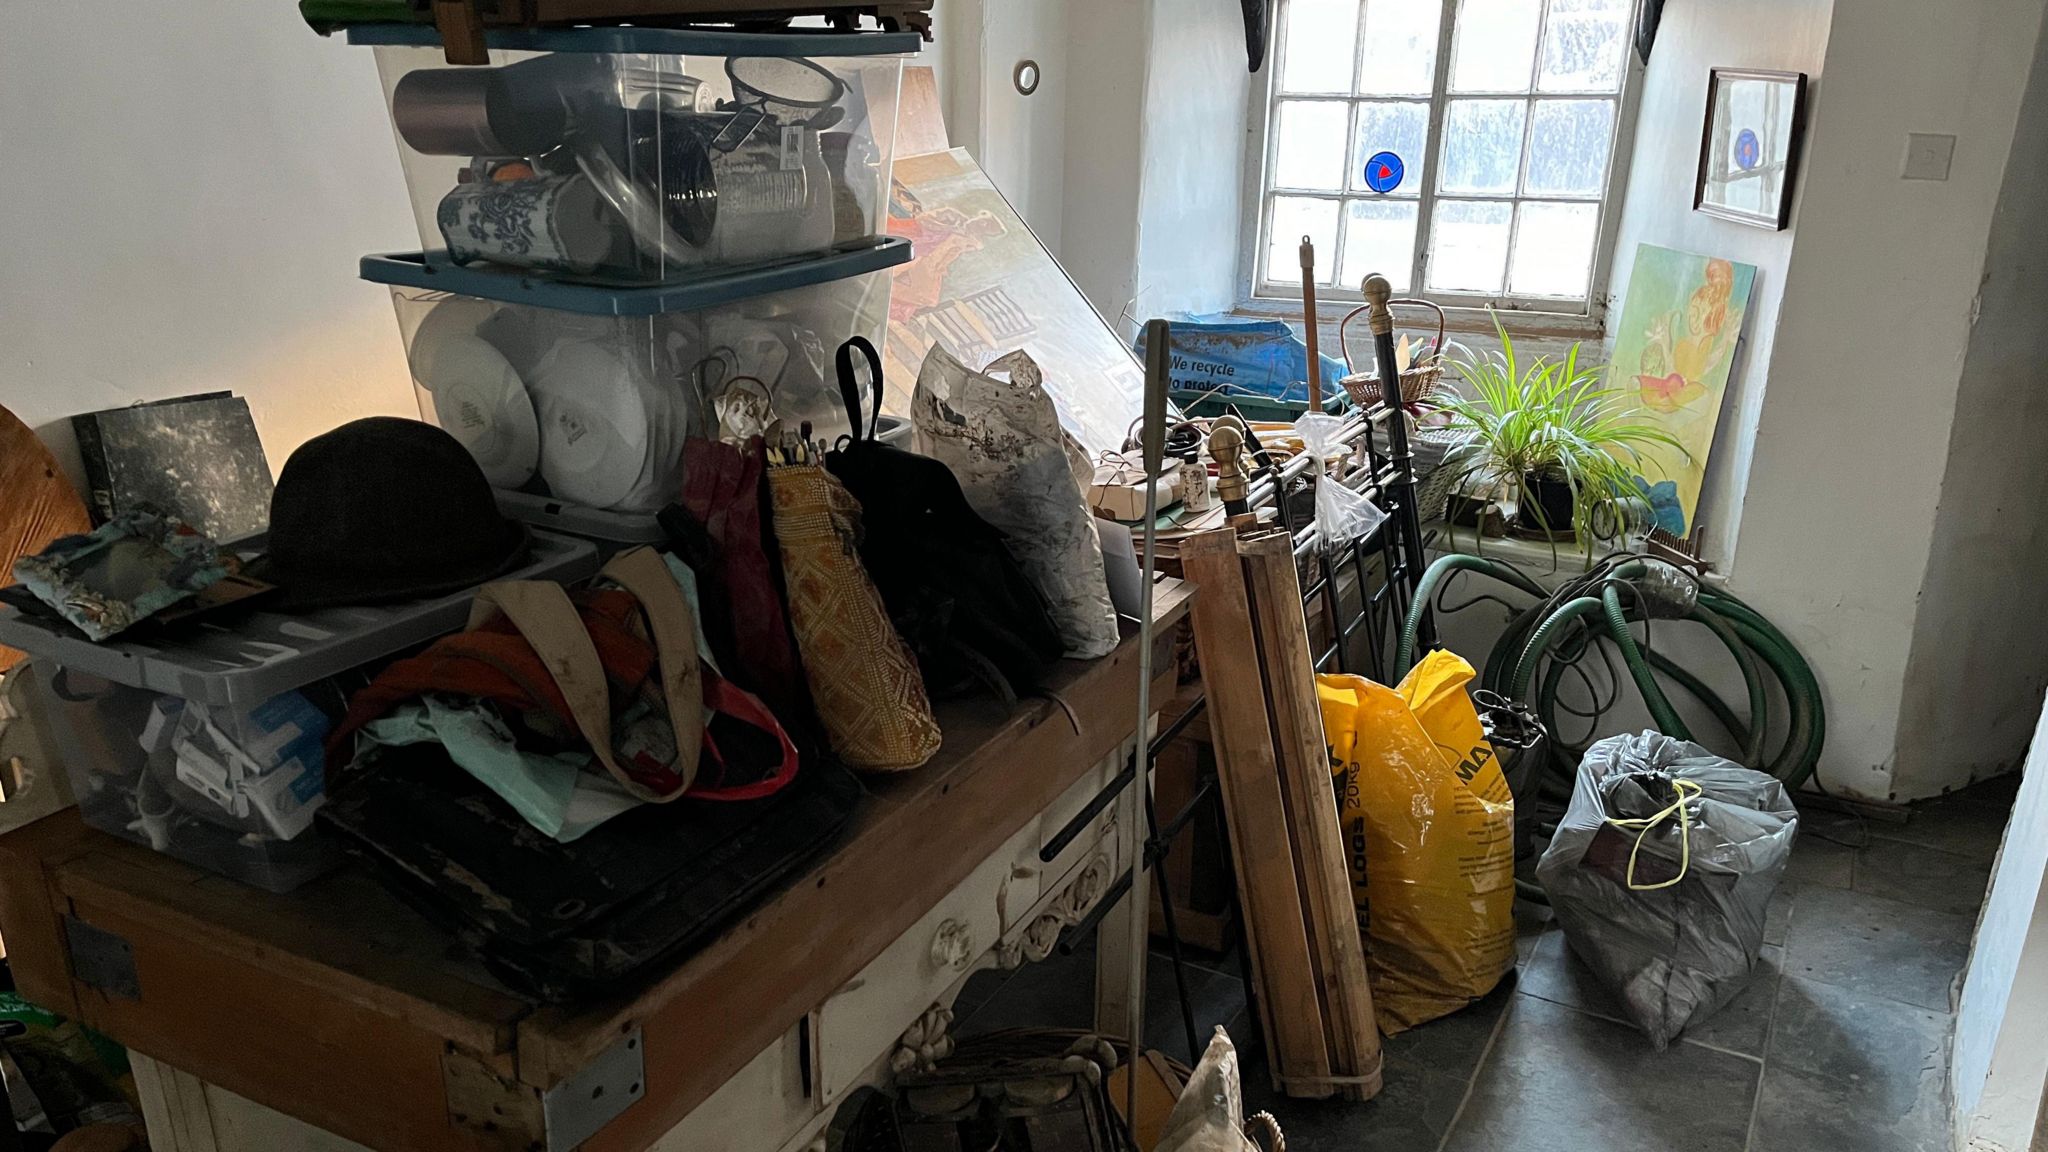 Personal items on tables and shelves after flooding